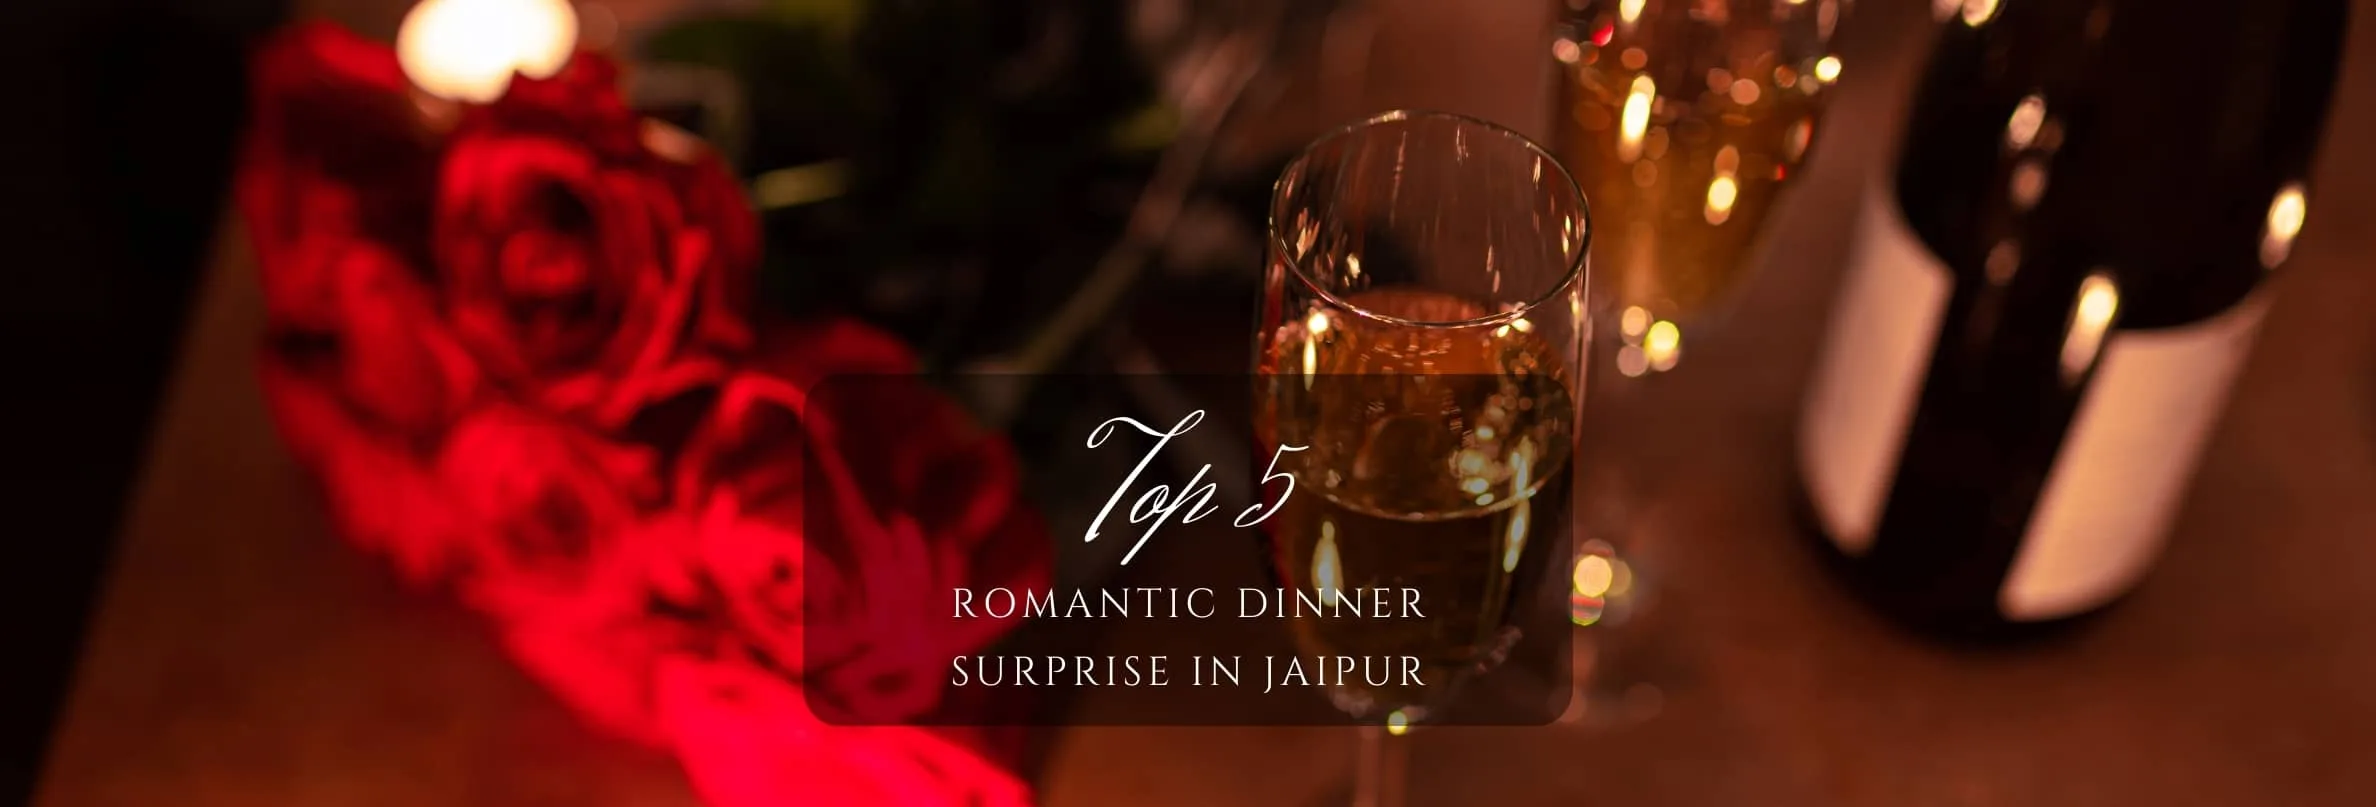 Top 5 Romantic Candlelight Dinner Dates For Couples In Jaipur.